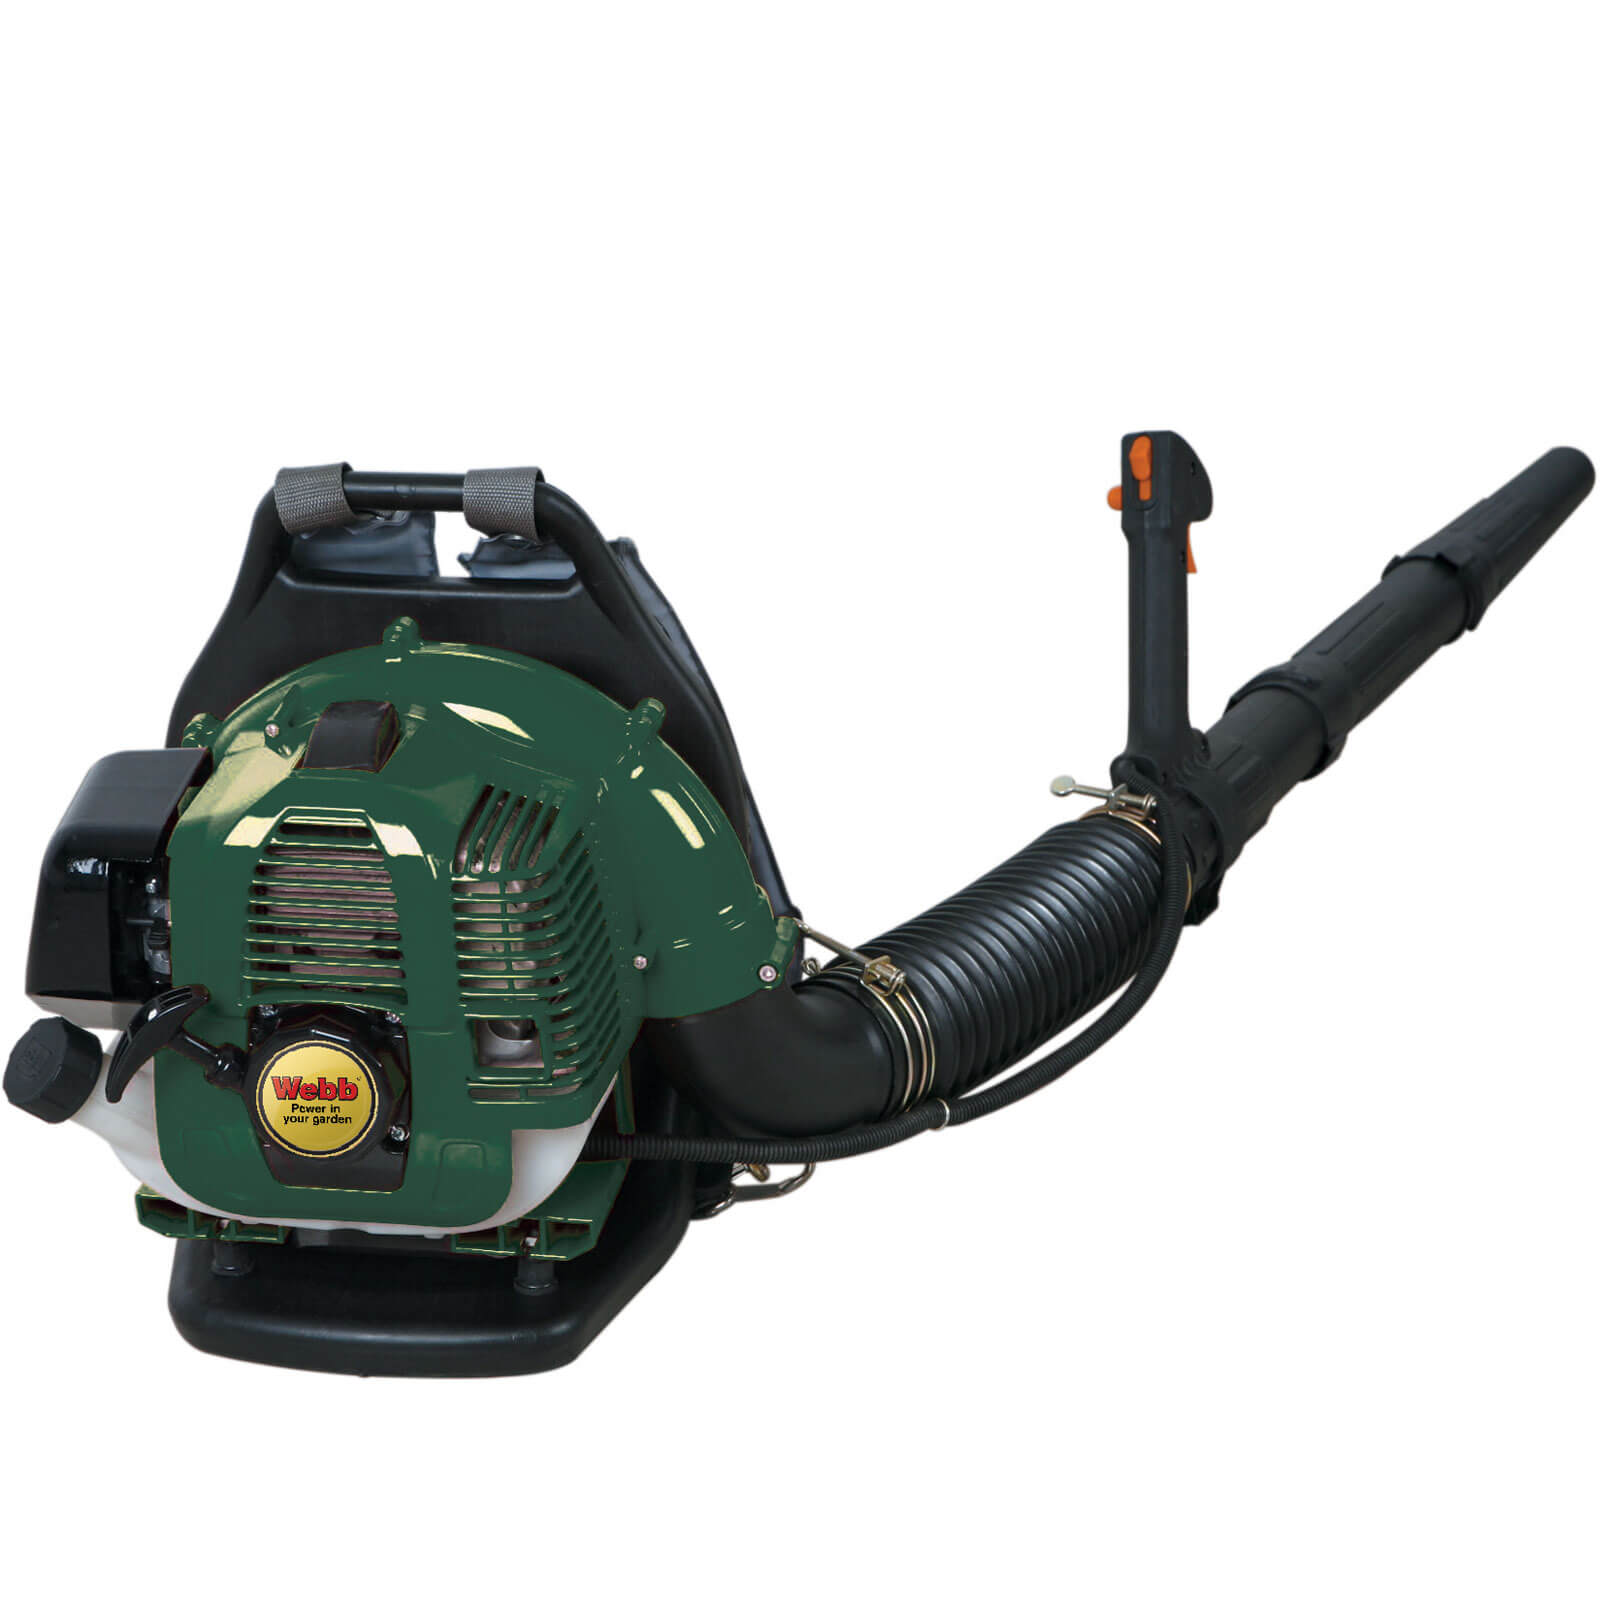 Image of Webb WEPB33 Petrol Backpack Blower FREE Garden Gloves & Safety Glasses Worth £6.90